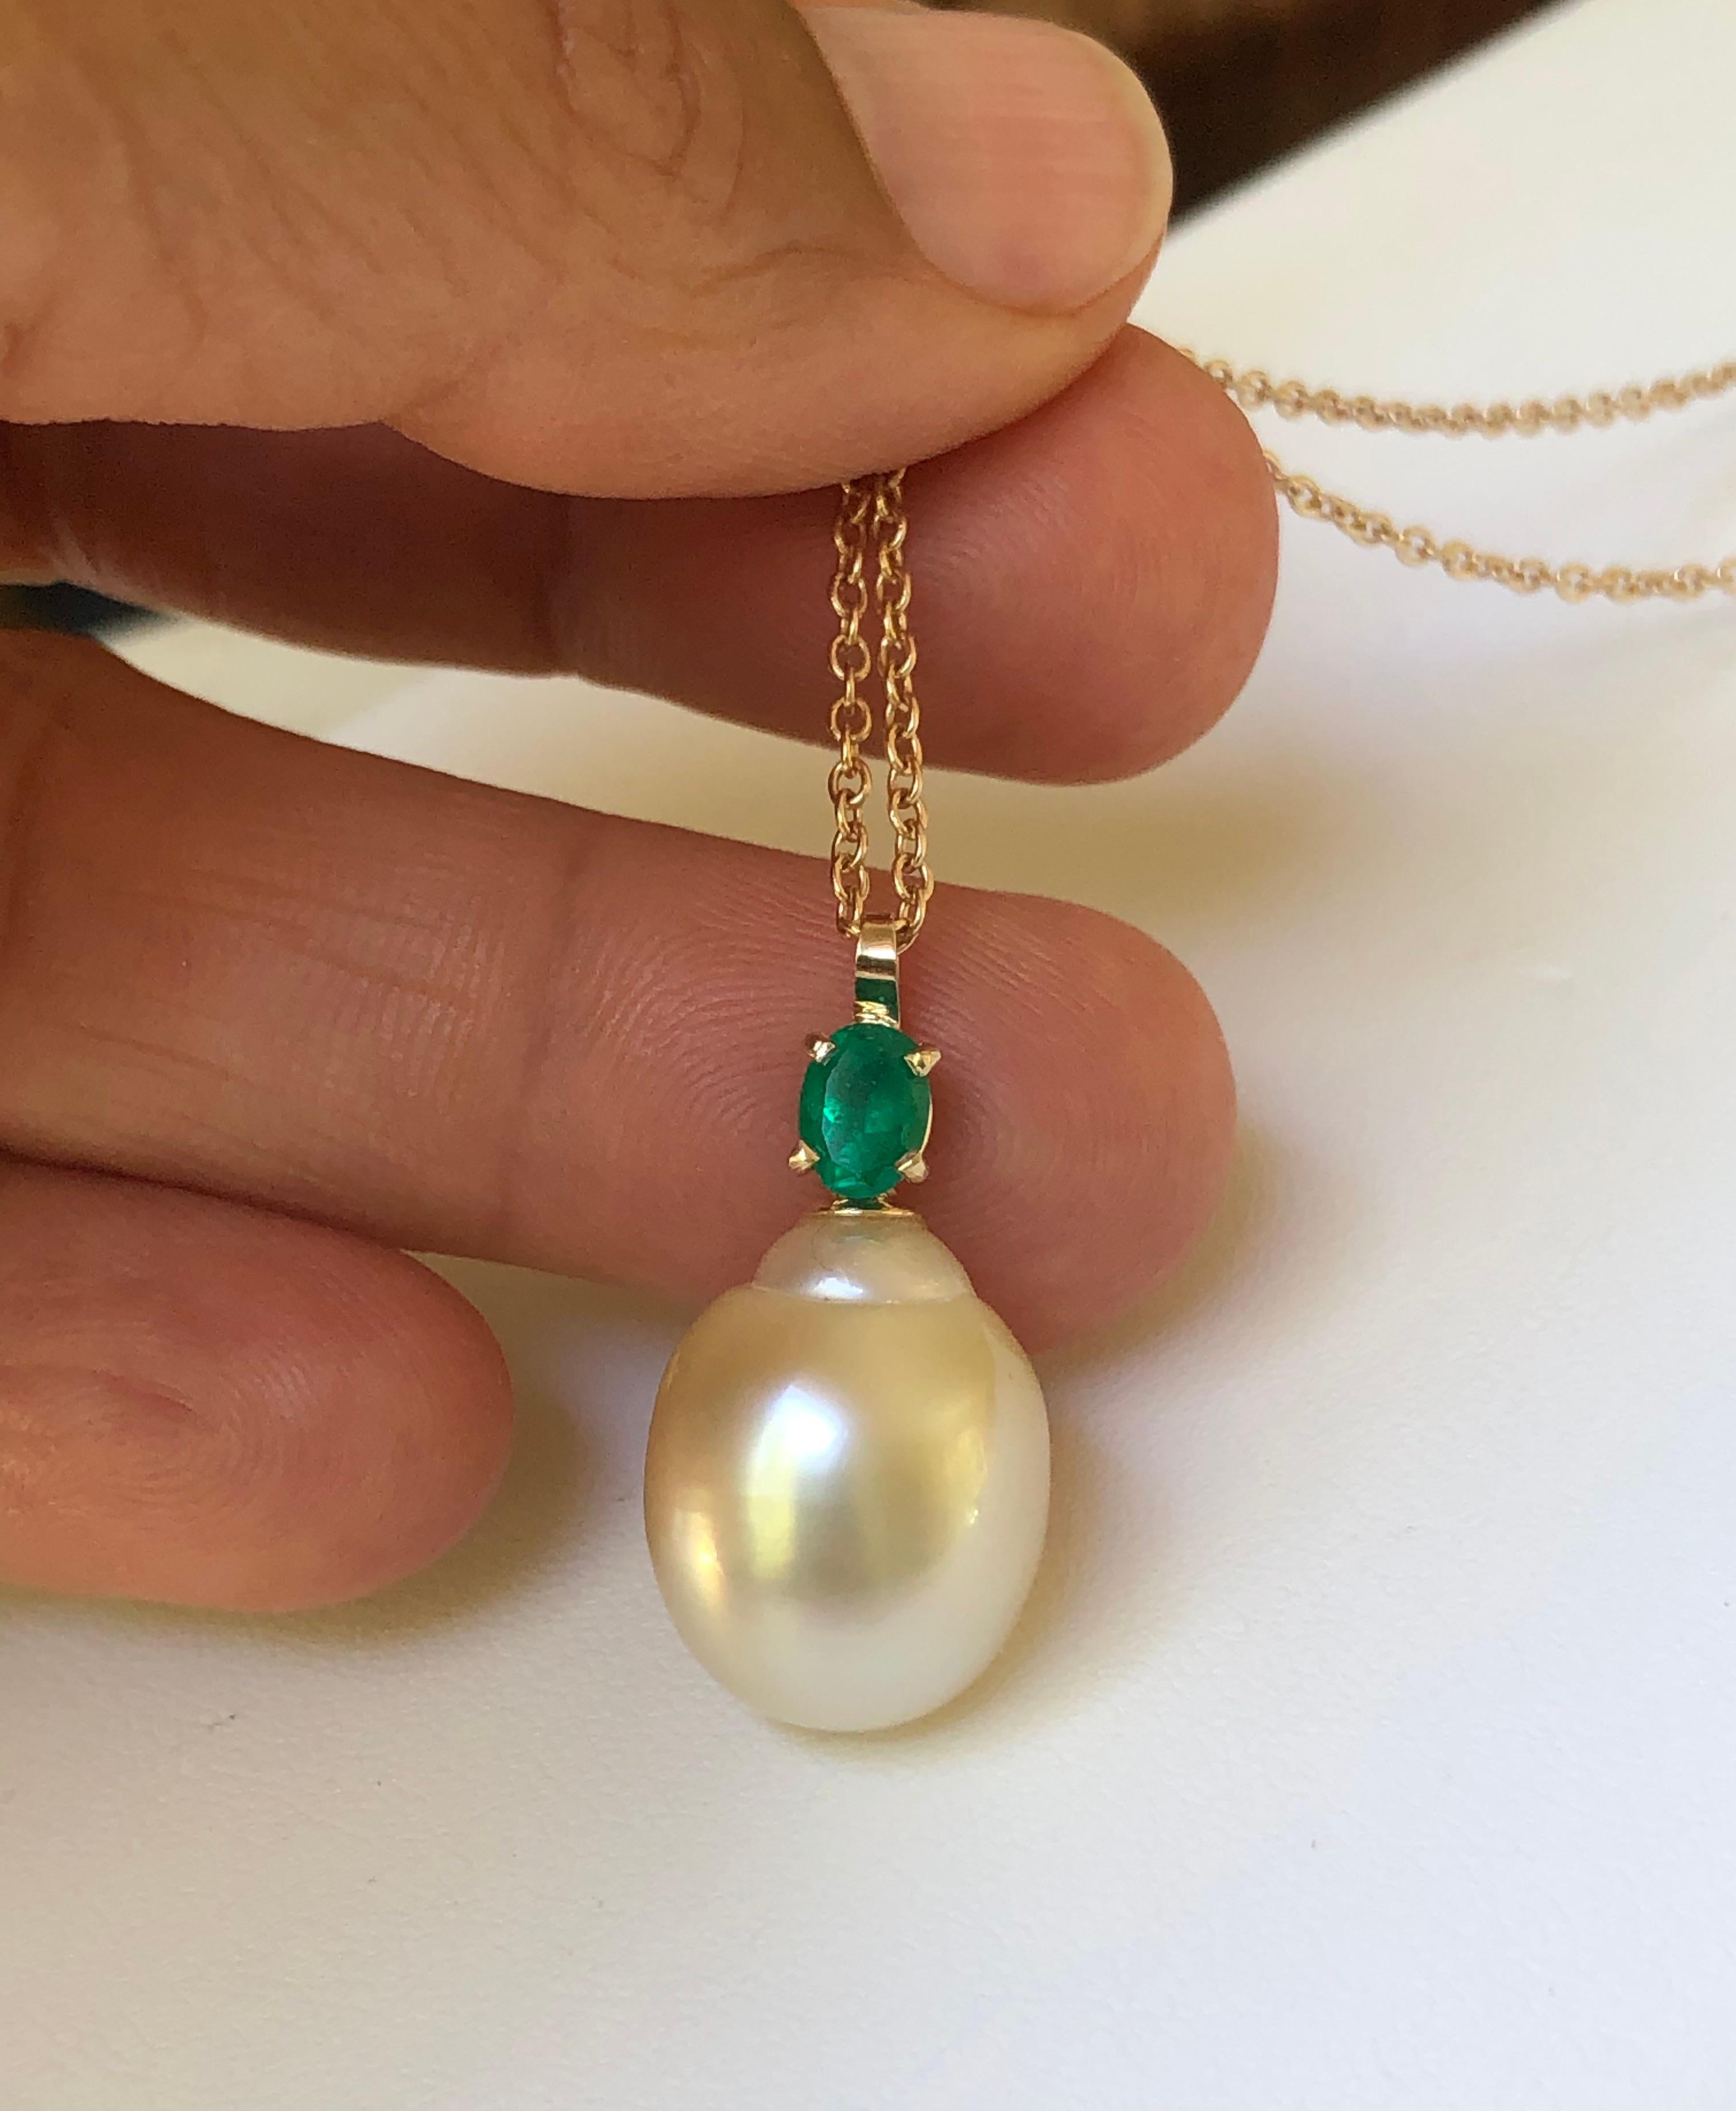 pearl necklace with emerald pendant